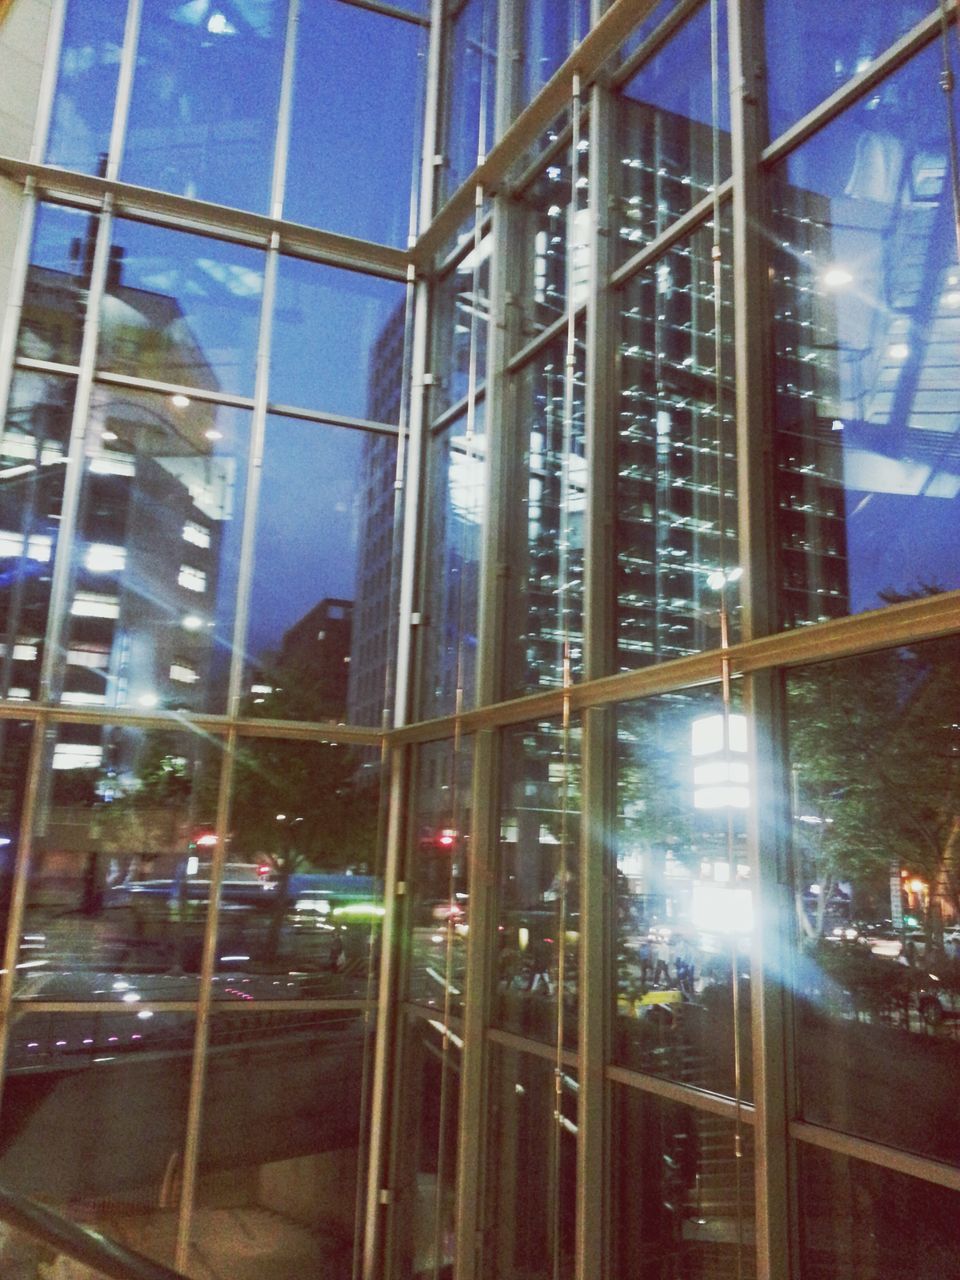 glass - material, architecture, built structure, transparent, reflection, indoors, window, building exterior, modern, city, glass, low angle view, office building, building, sky, city life, day, incidental people, illuminated, travel destinations